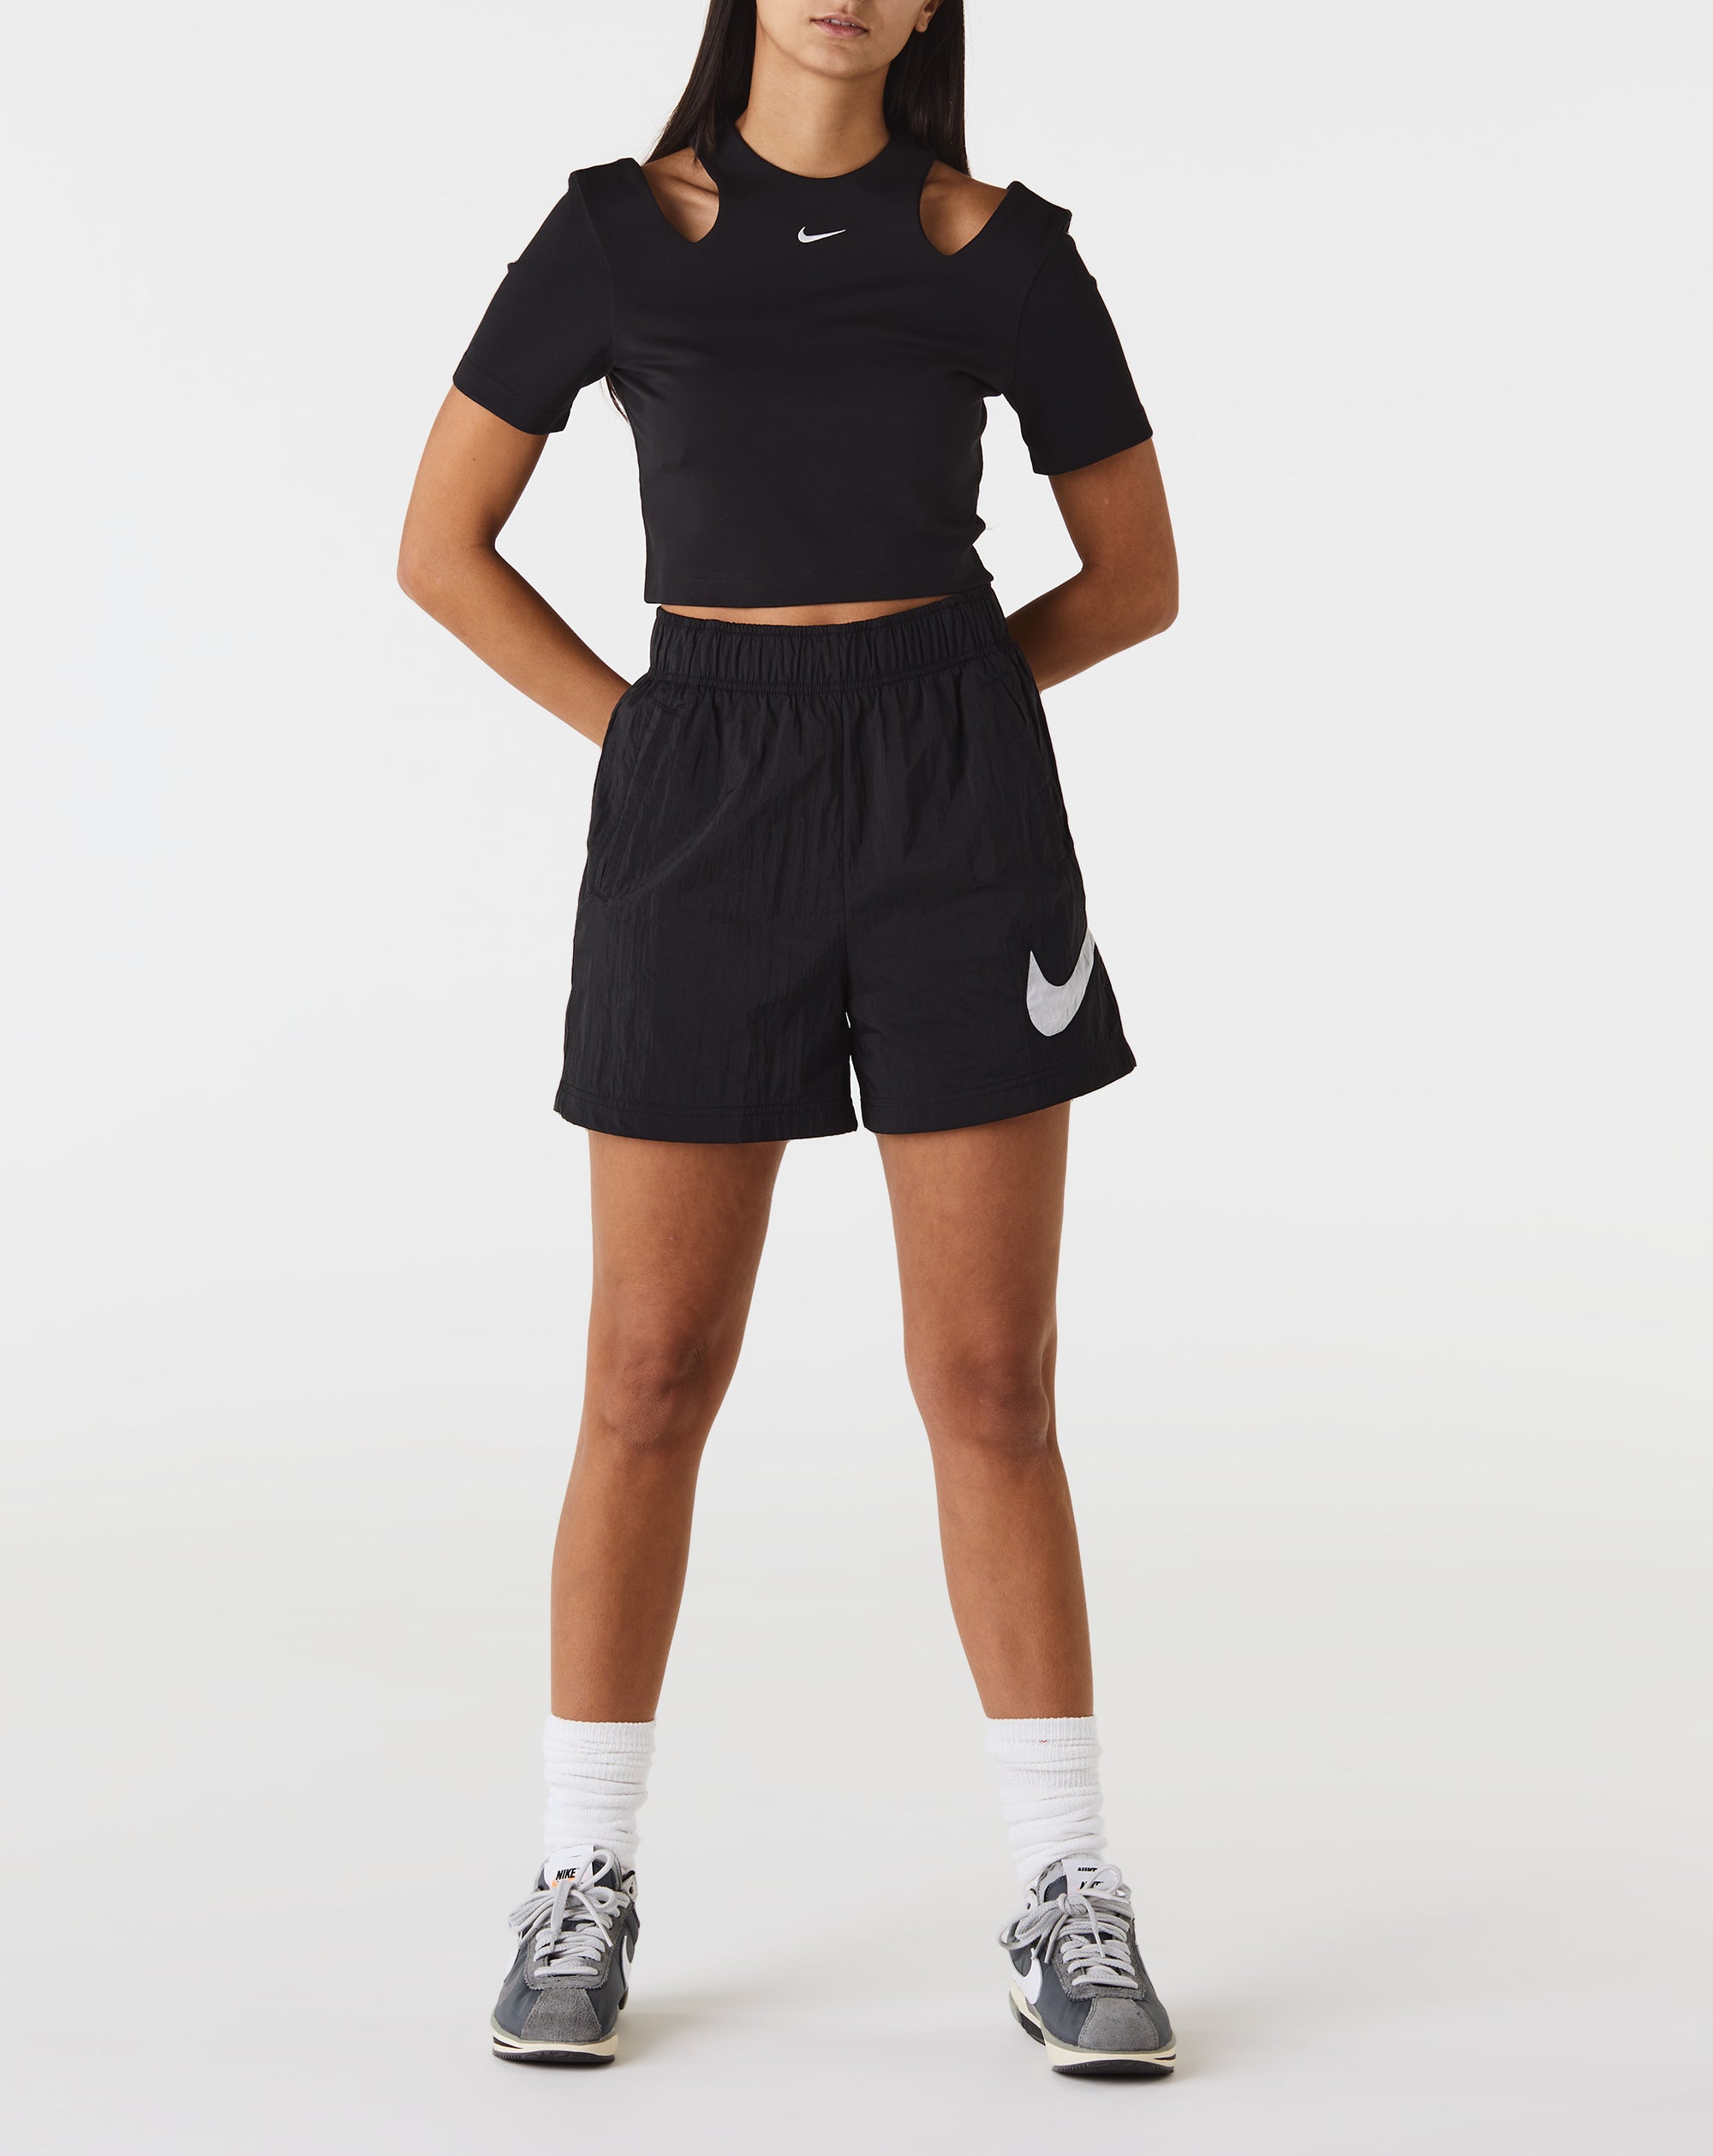 Nike Women's Essential Woven Easy Shorts - Rule of Next Apparel